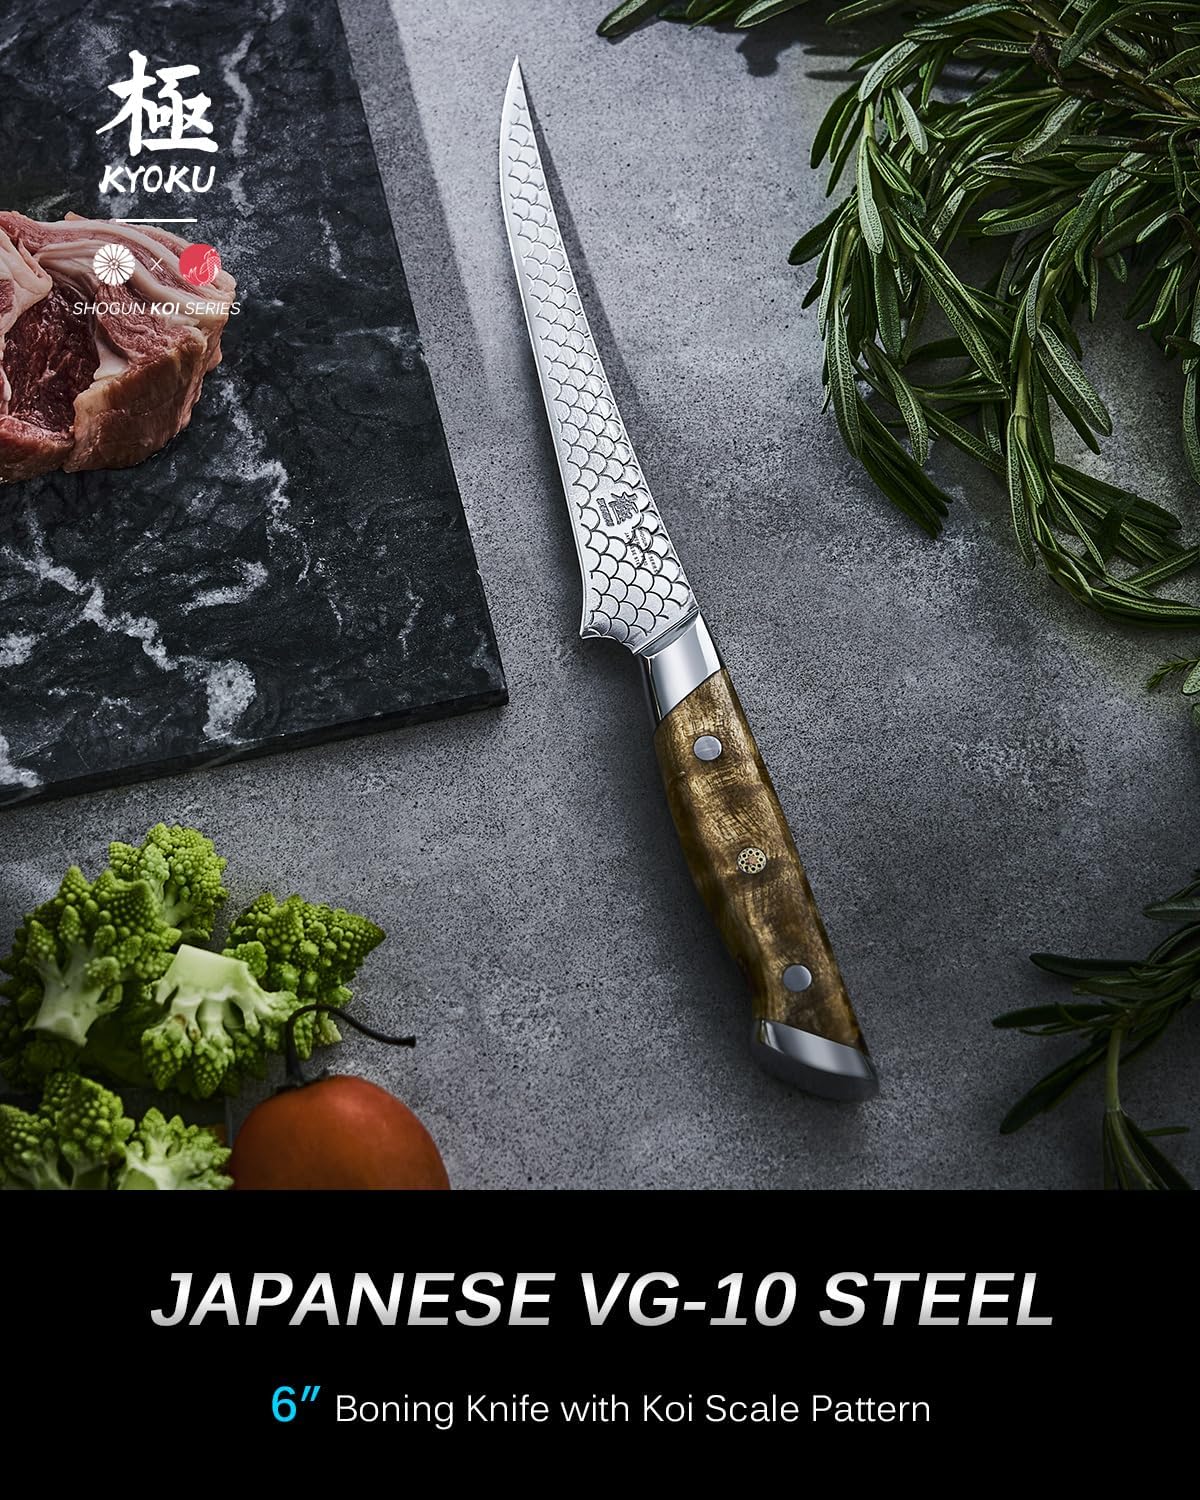 KYOKU 7 Vegetable Cleaver, Shogun Koi Series Vegetable Knife with Koi Scale Pattern, Japanese VG10 Stainless Steel Cleaver Knife with Sheath  Gift Box, Full Tang Kitchen Knife for Chopping  Slicing